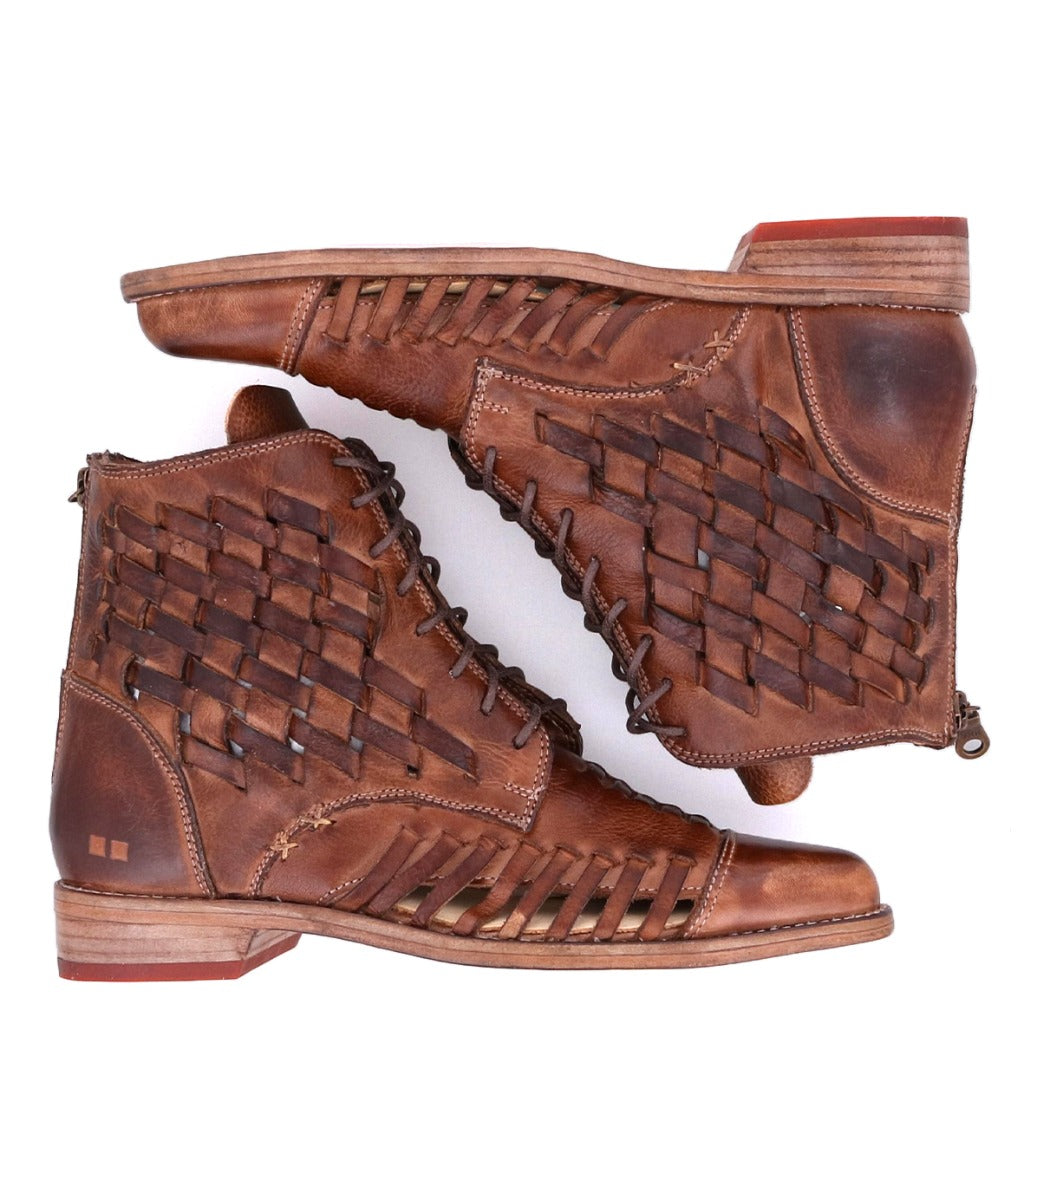 A pair of brown leather Loretta boots with woven details by Bed Stu.